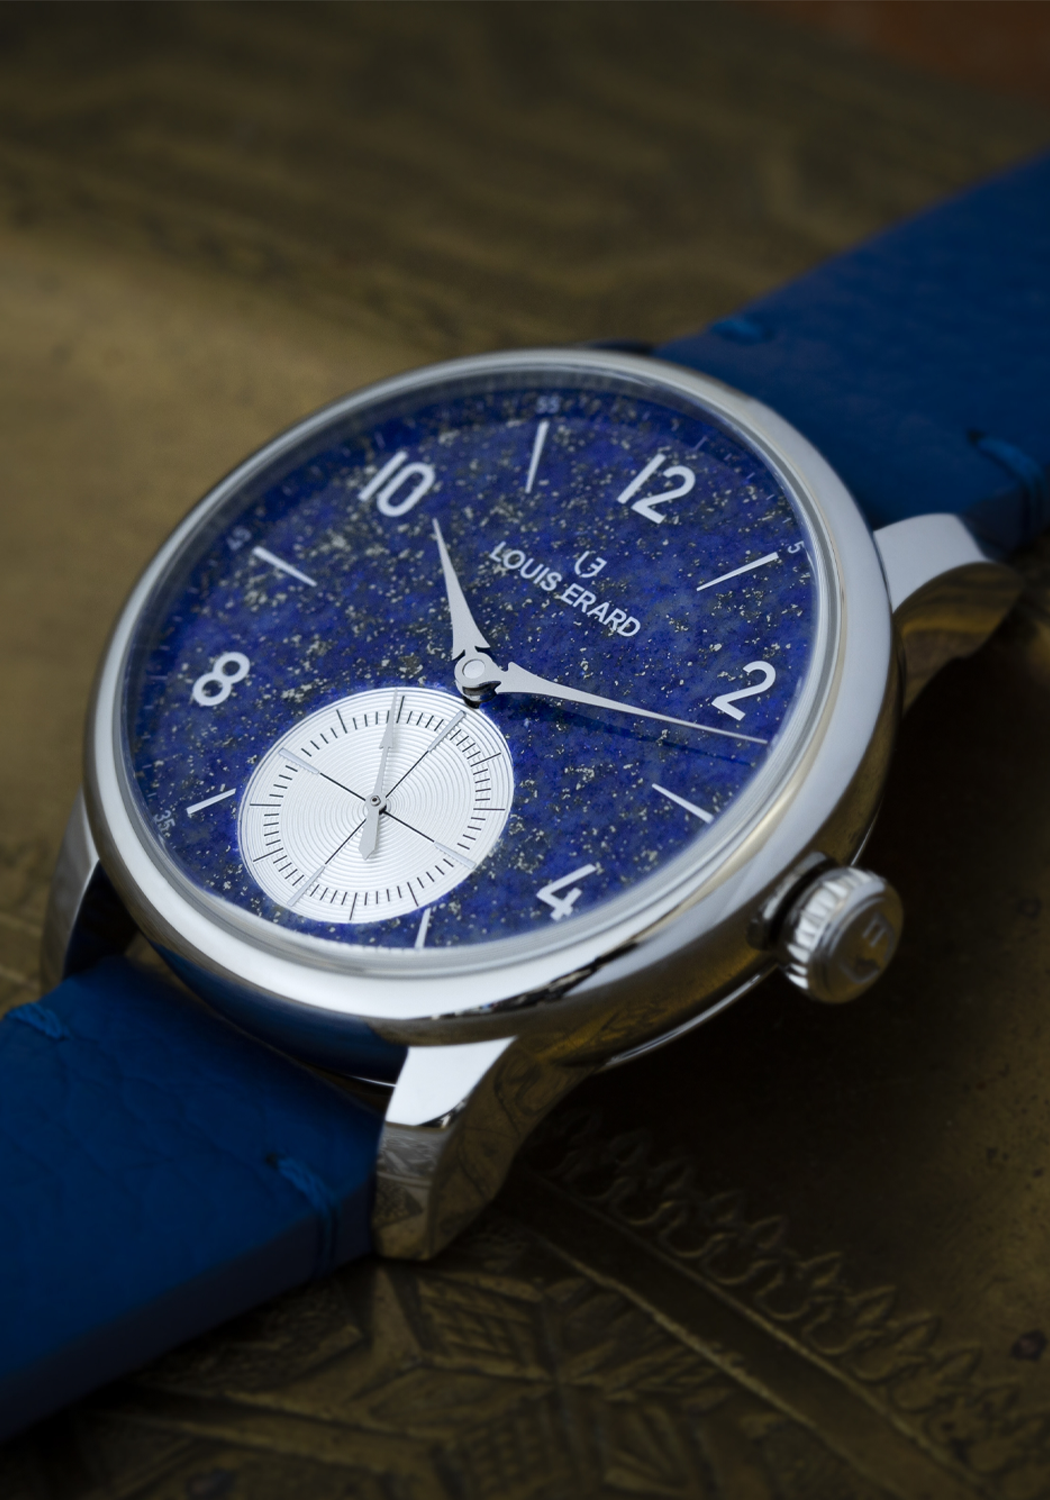 Hands-On With Three New Colourful Louis Erard Excellence Petite